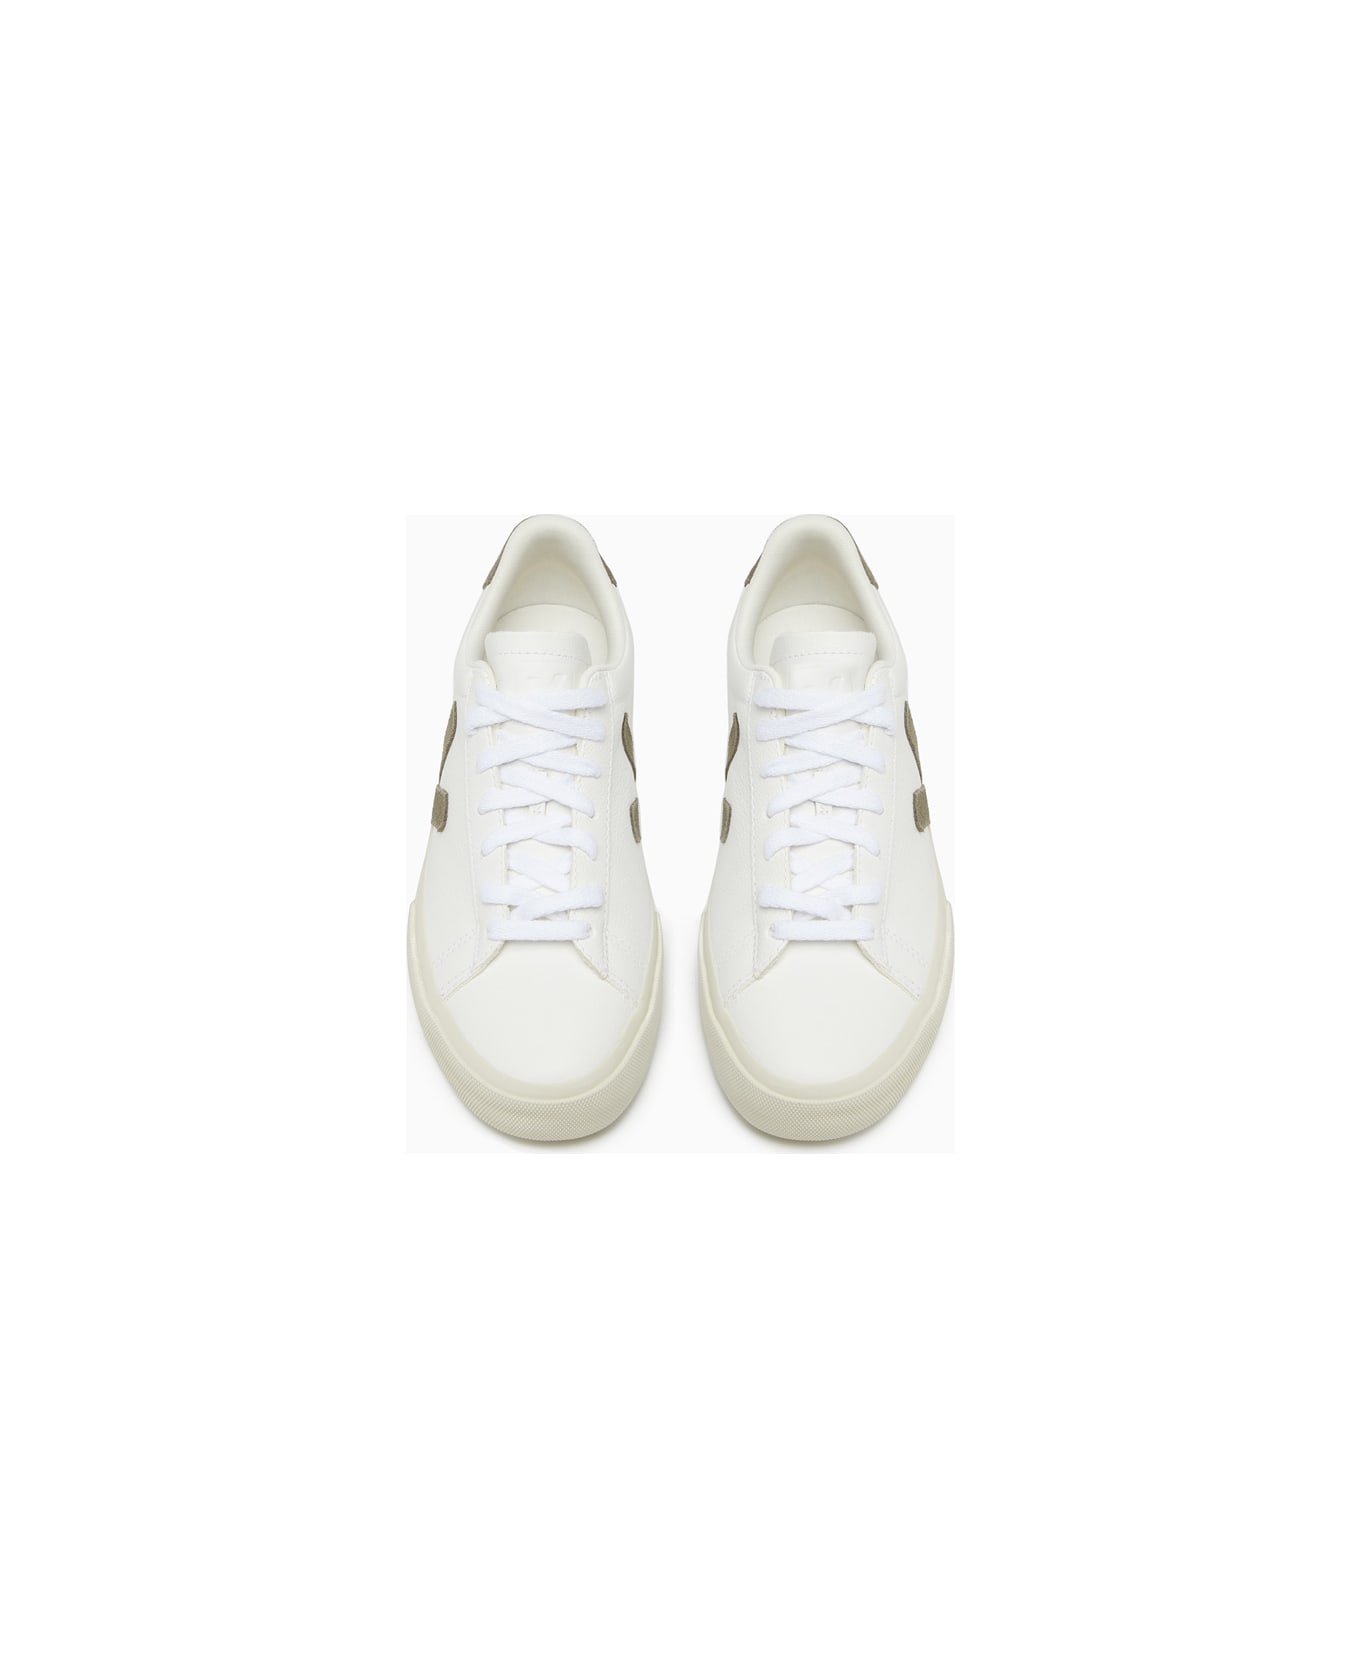 Veja Campo Chromefree Leather Sneakers Cp0502347 | italist, ALWAYS LIKE ...